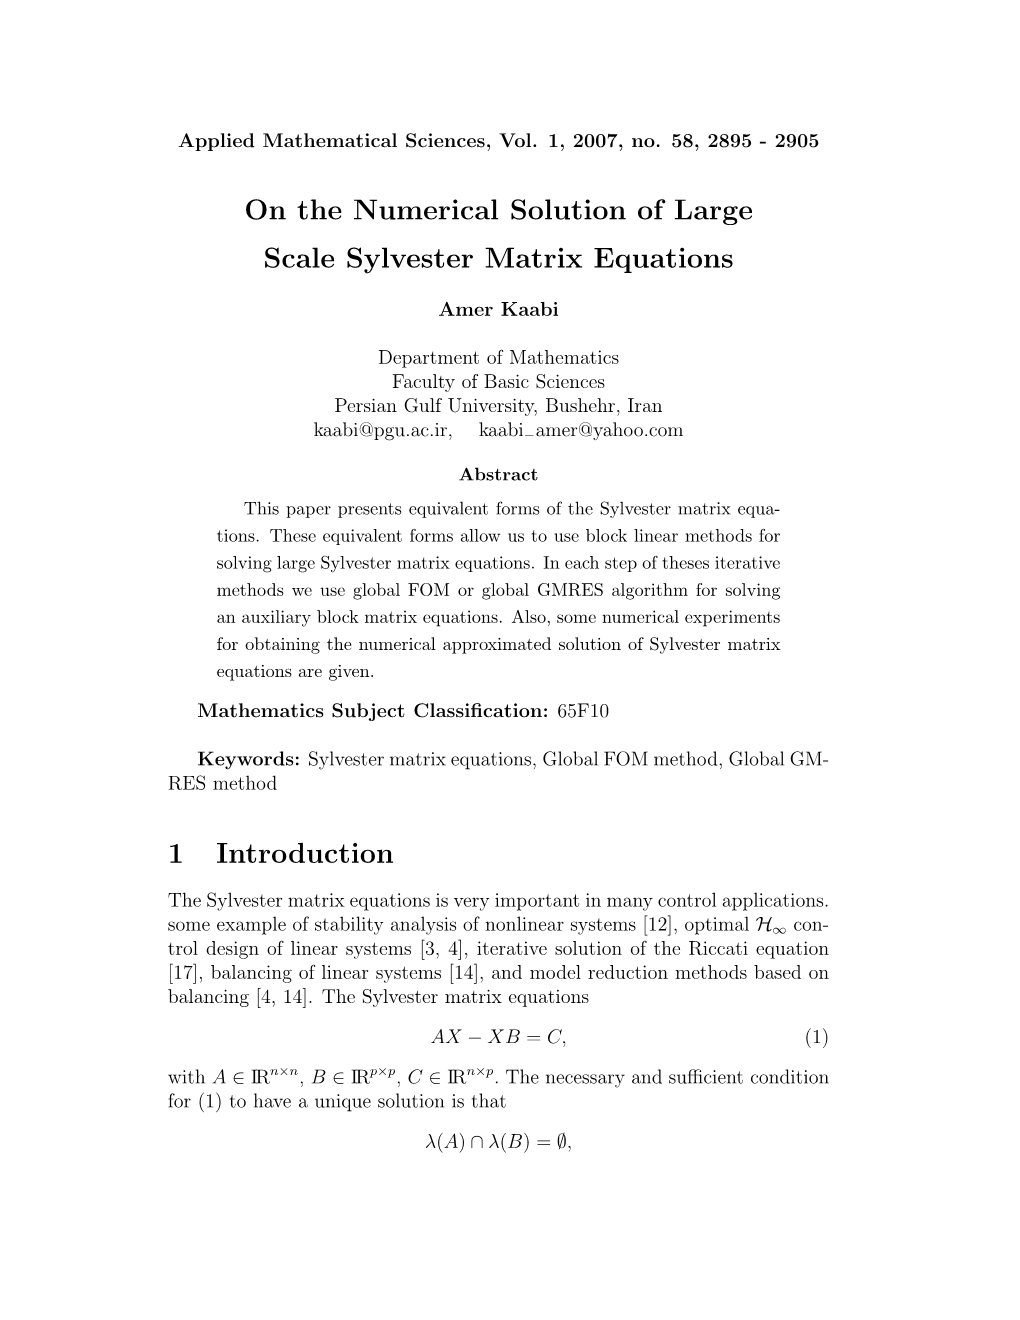 On the Numerical Solution of Large Scale Sylvester Matrix Equations 1